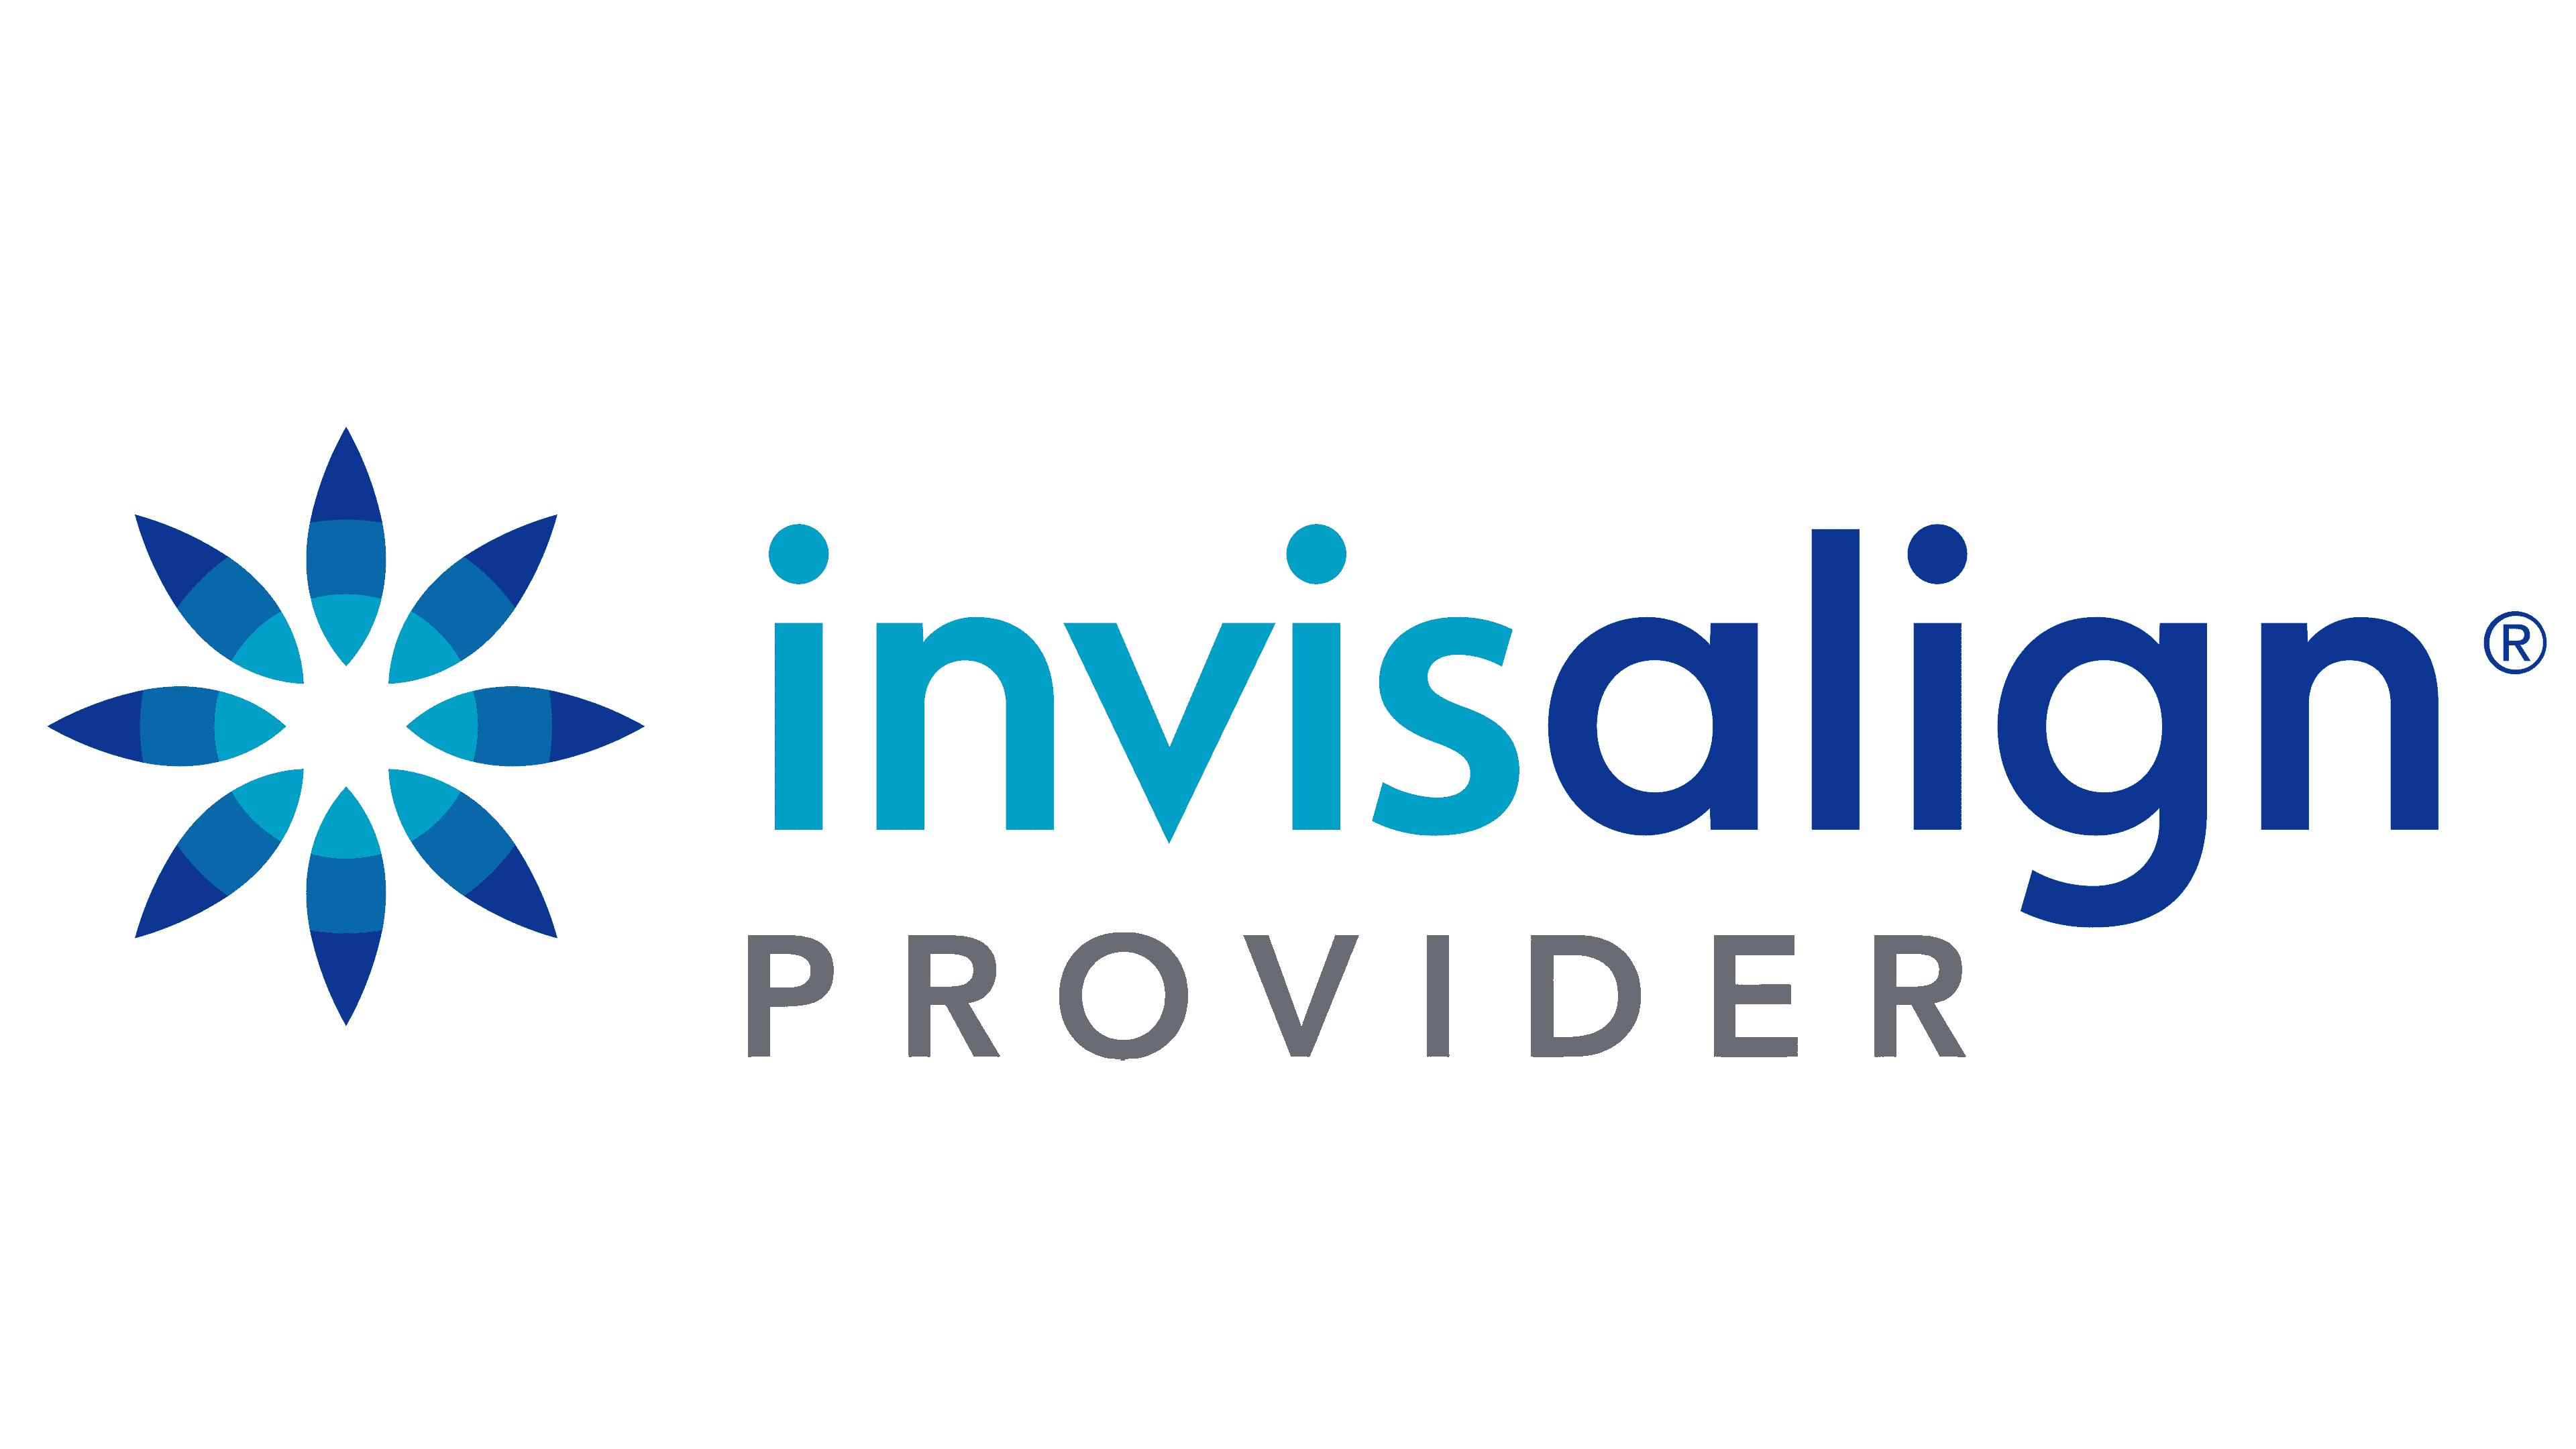 Invisalign Logo, symbol, meaning, history, PNG, brand